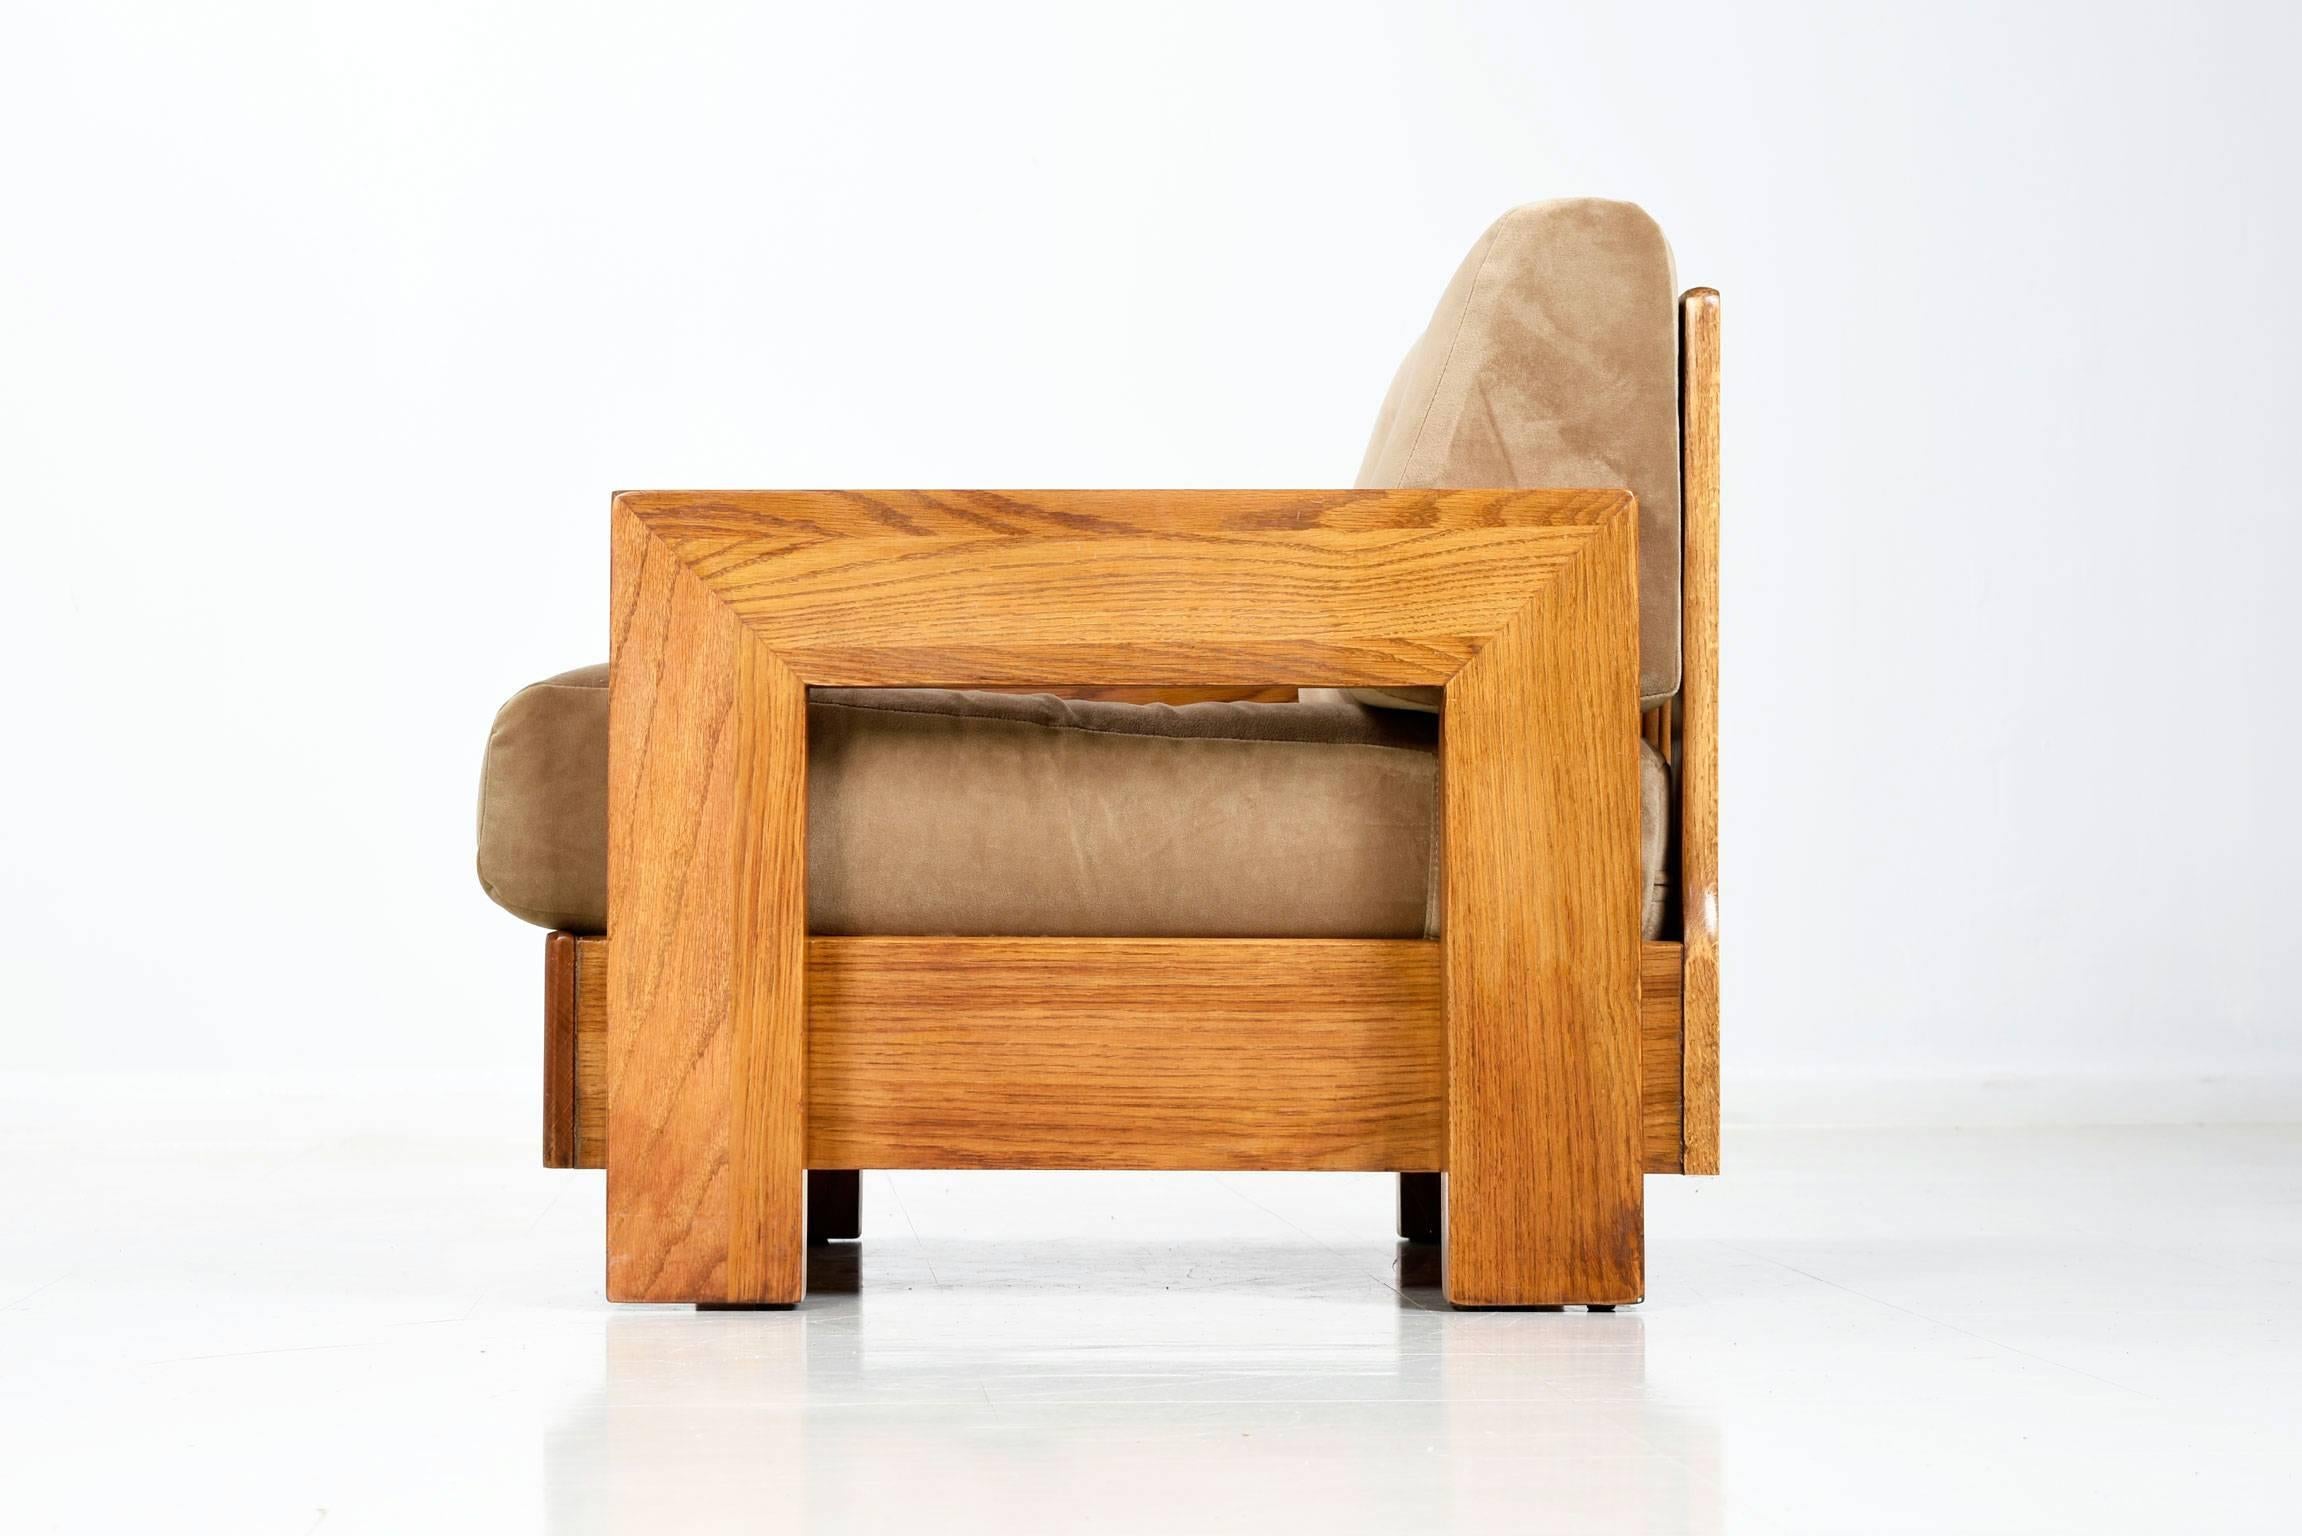 Restored solid oak vintage armchair. This Mission style bold, broad and sturdy, the chair blends modernist and traditional elements. The deep seats and thick cushions aid in comfort while providing a high seat height. The chair has been restored